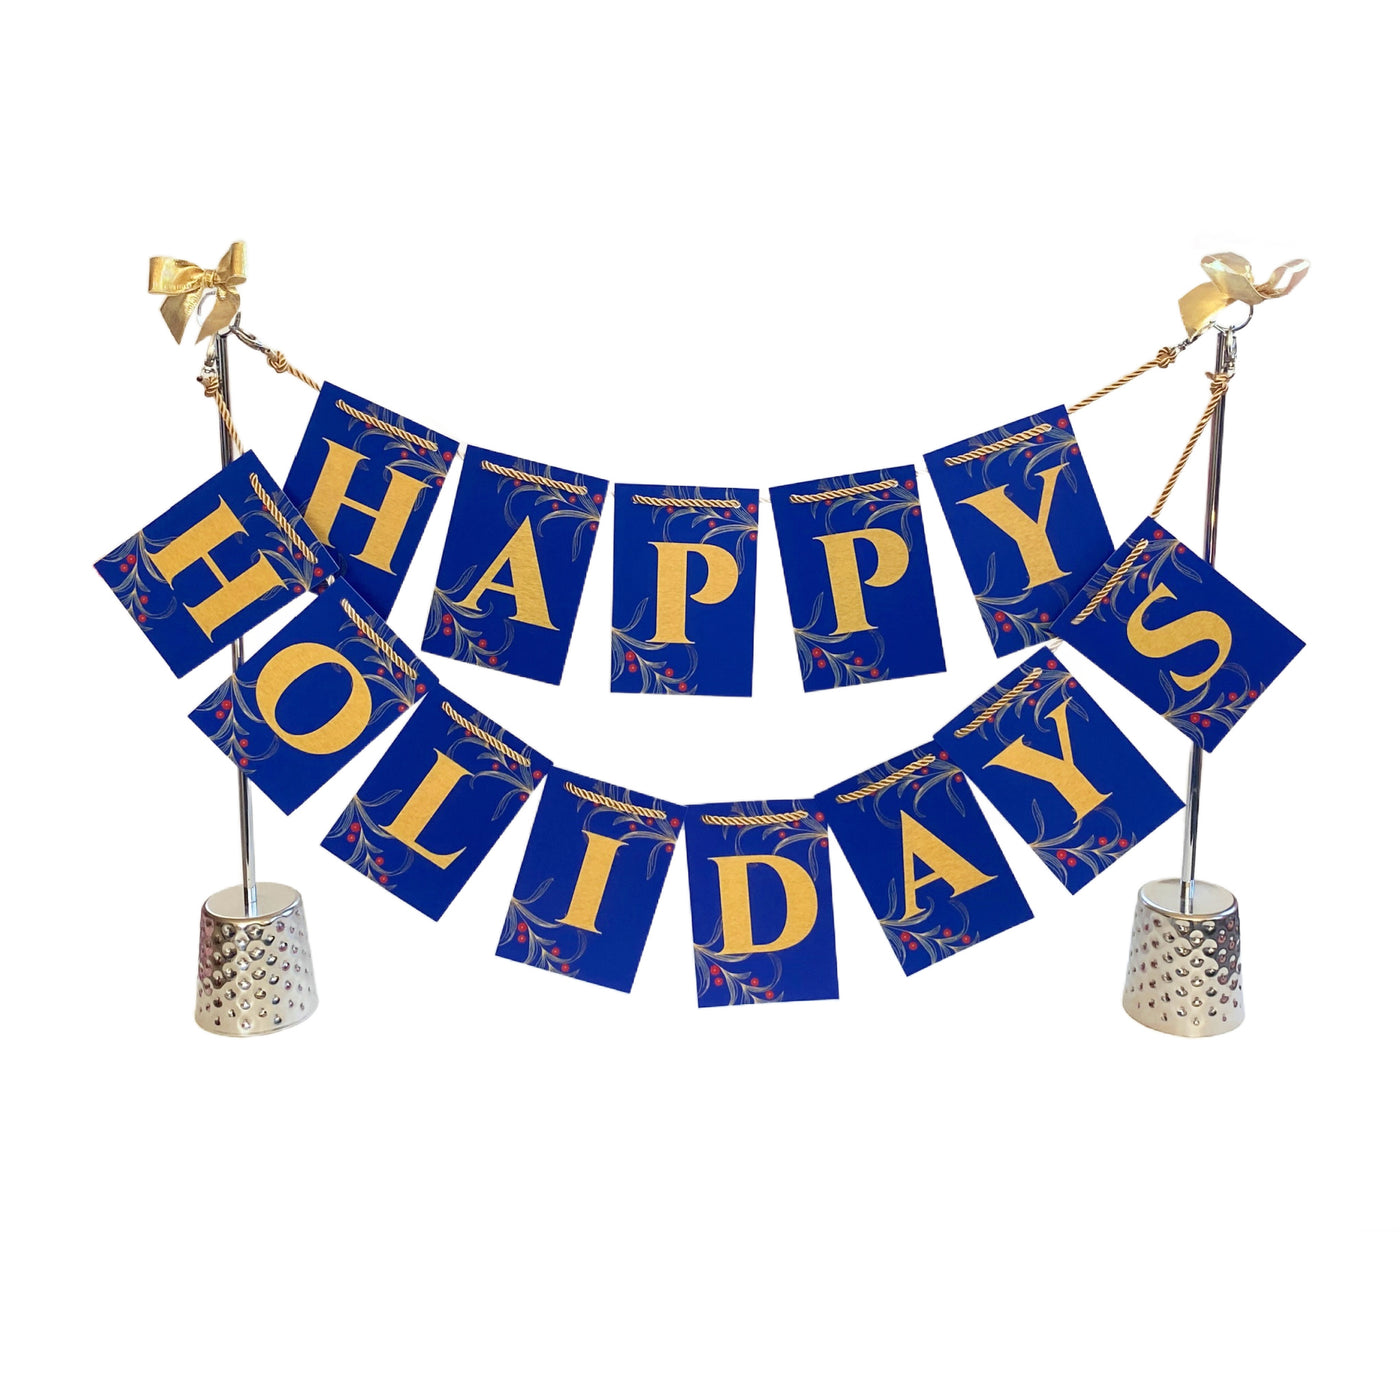 Happy Holidays Banner